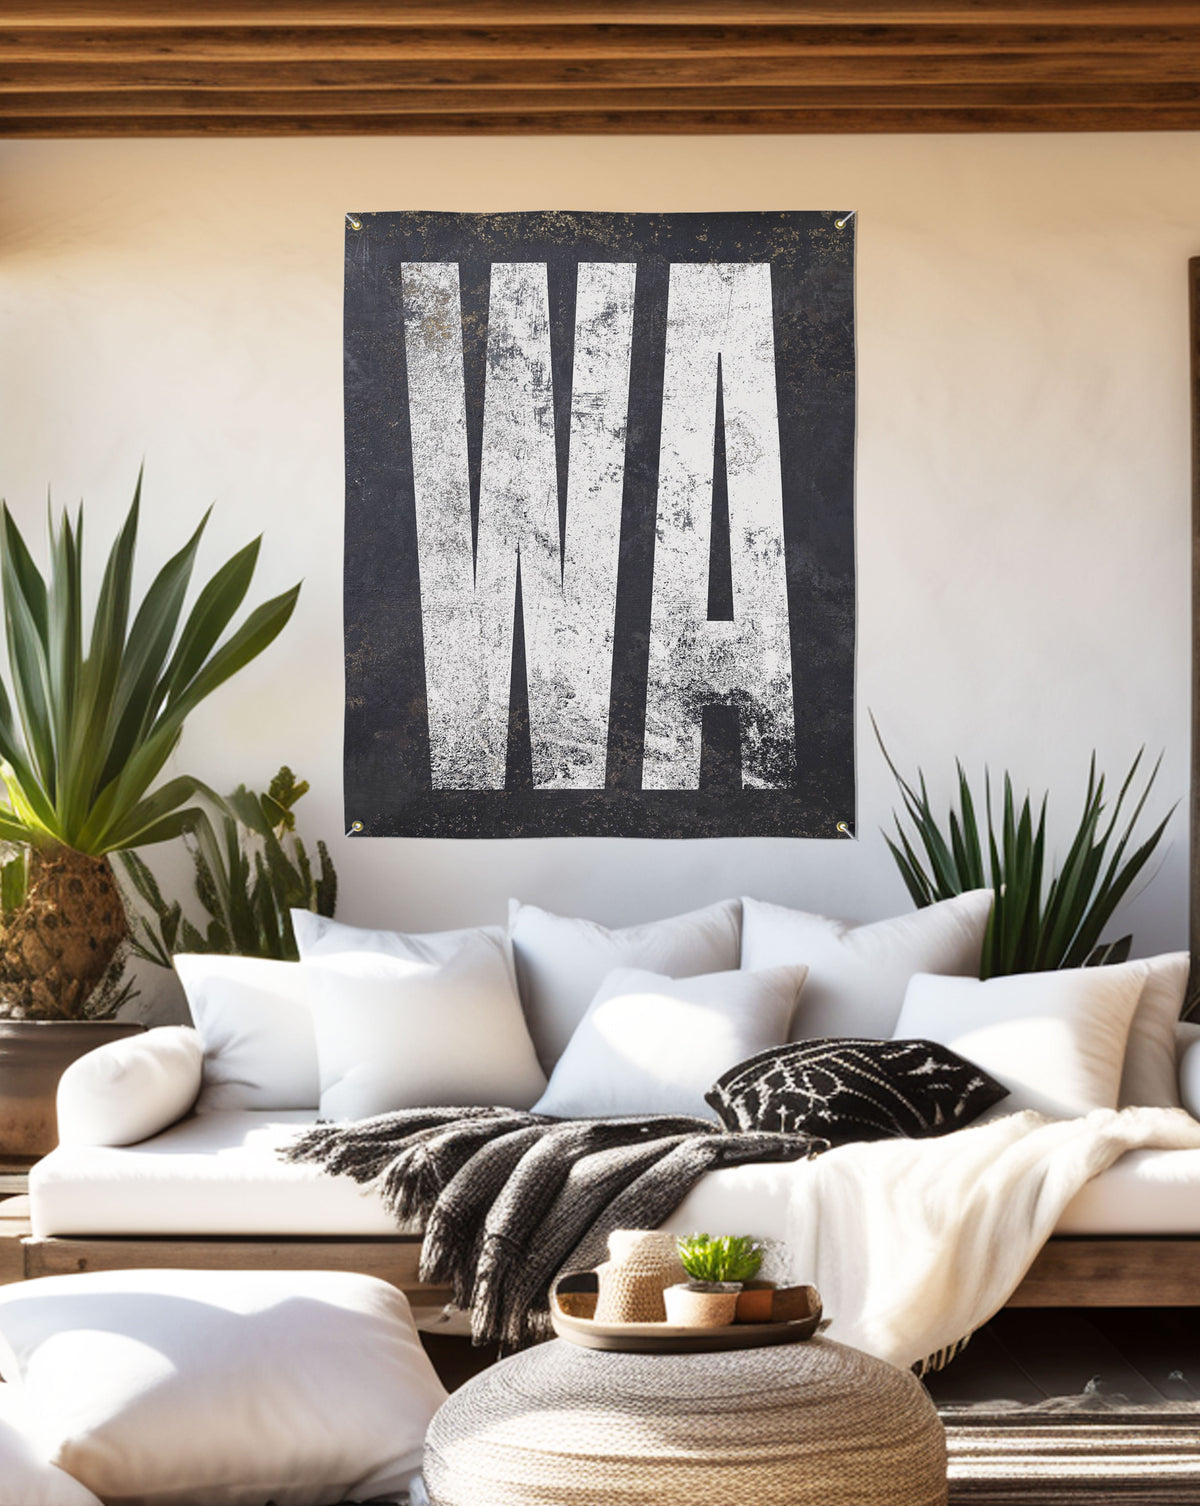 Sleek 'WA' vinyl sign, perfect for minimalist outdoor decor or as a chic addition to patio and garden spaces.